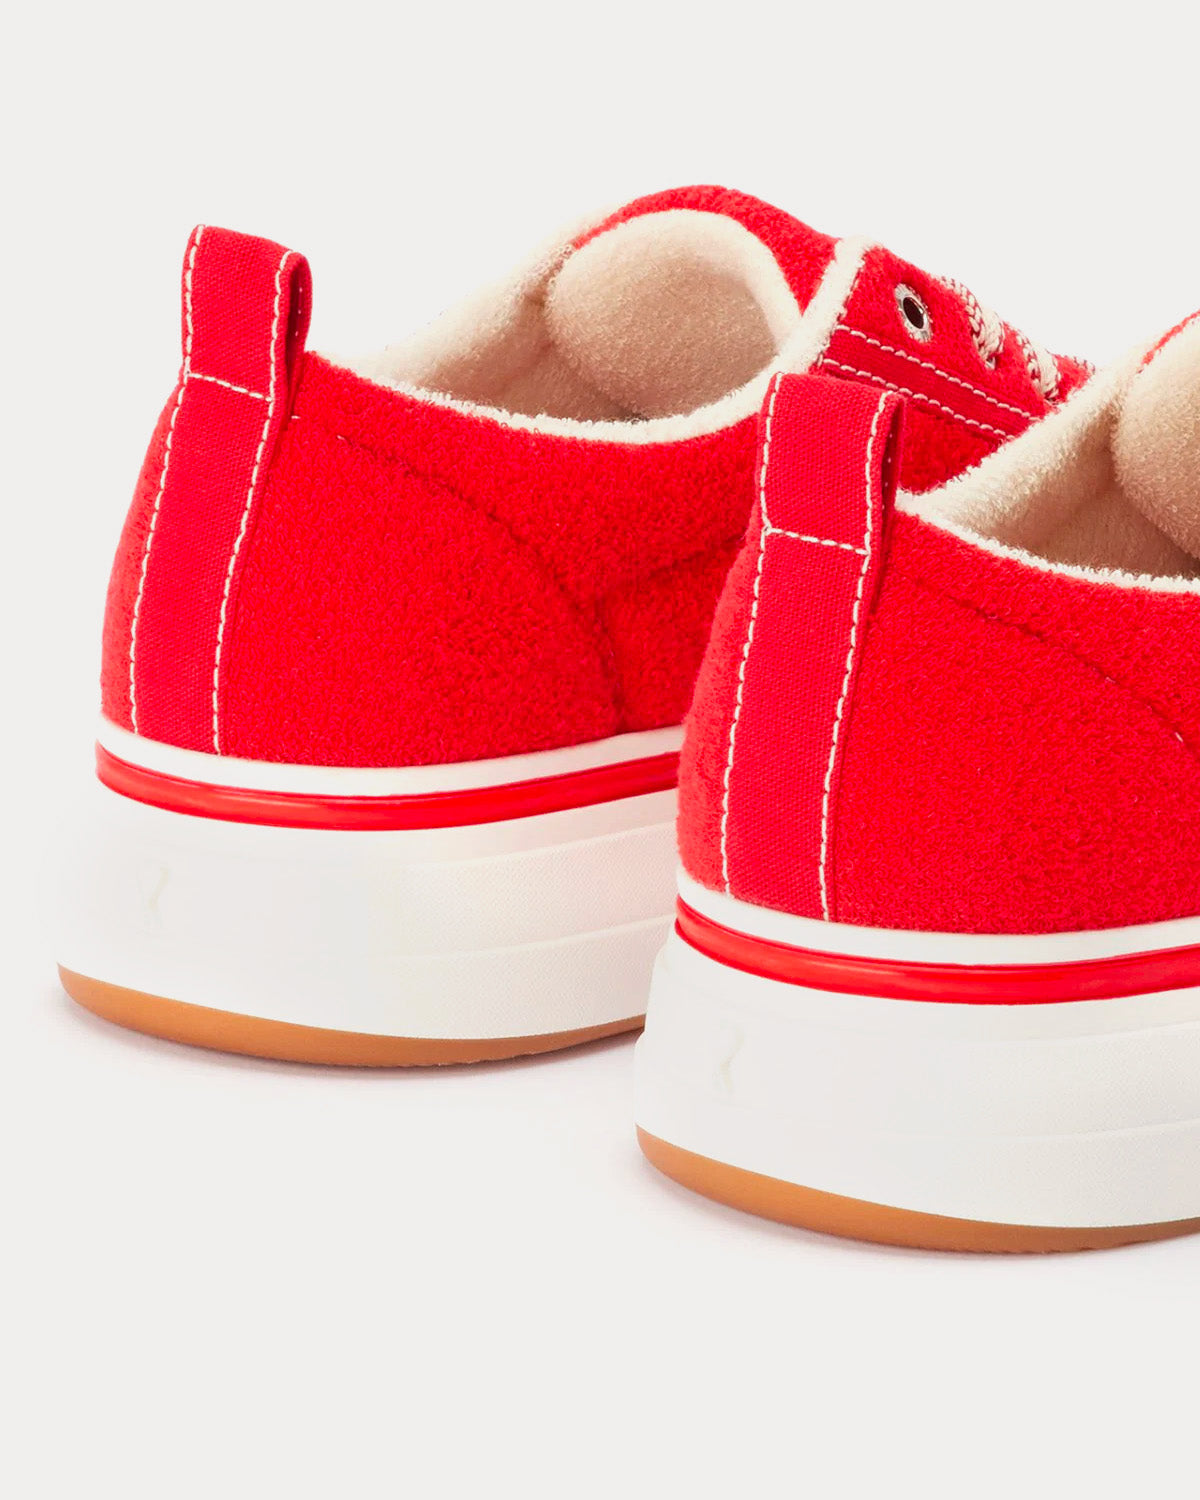 AMI - 1980 Canvas Red Low Top Sneakers